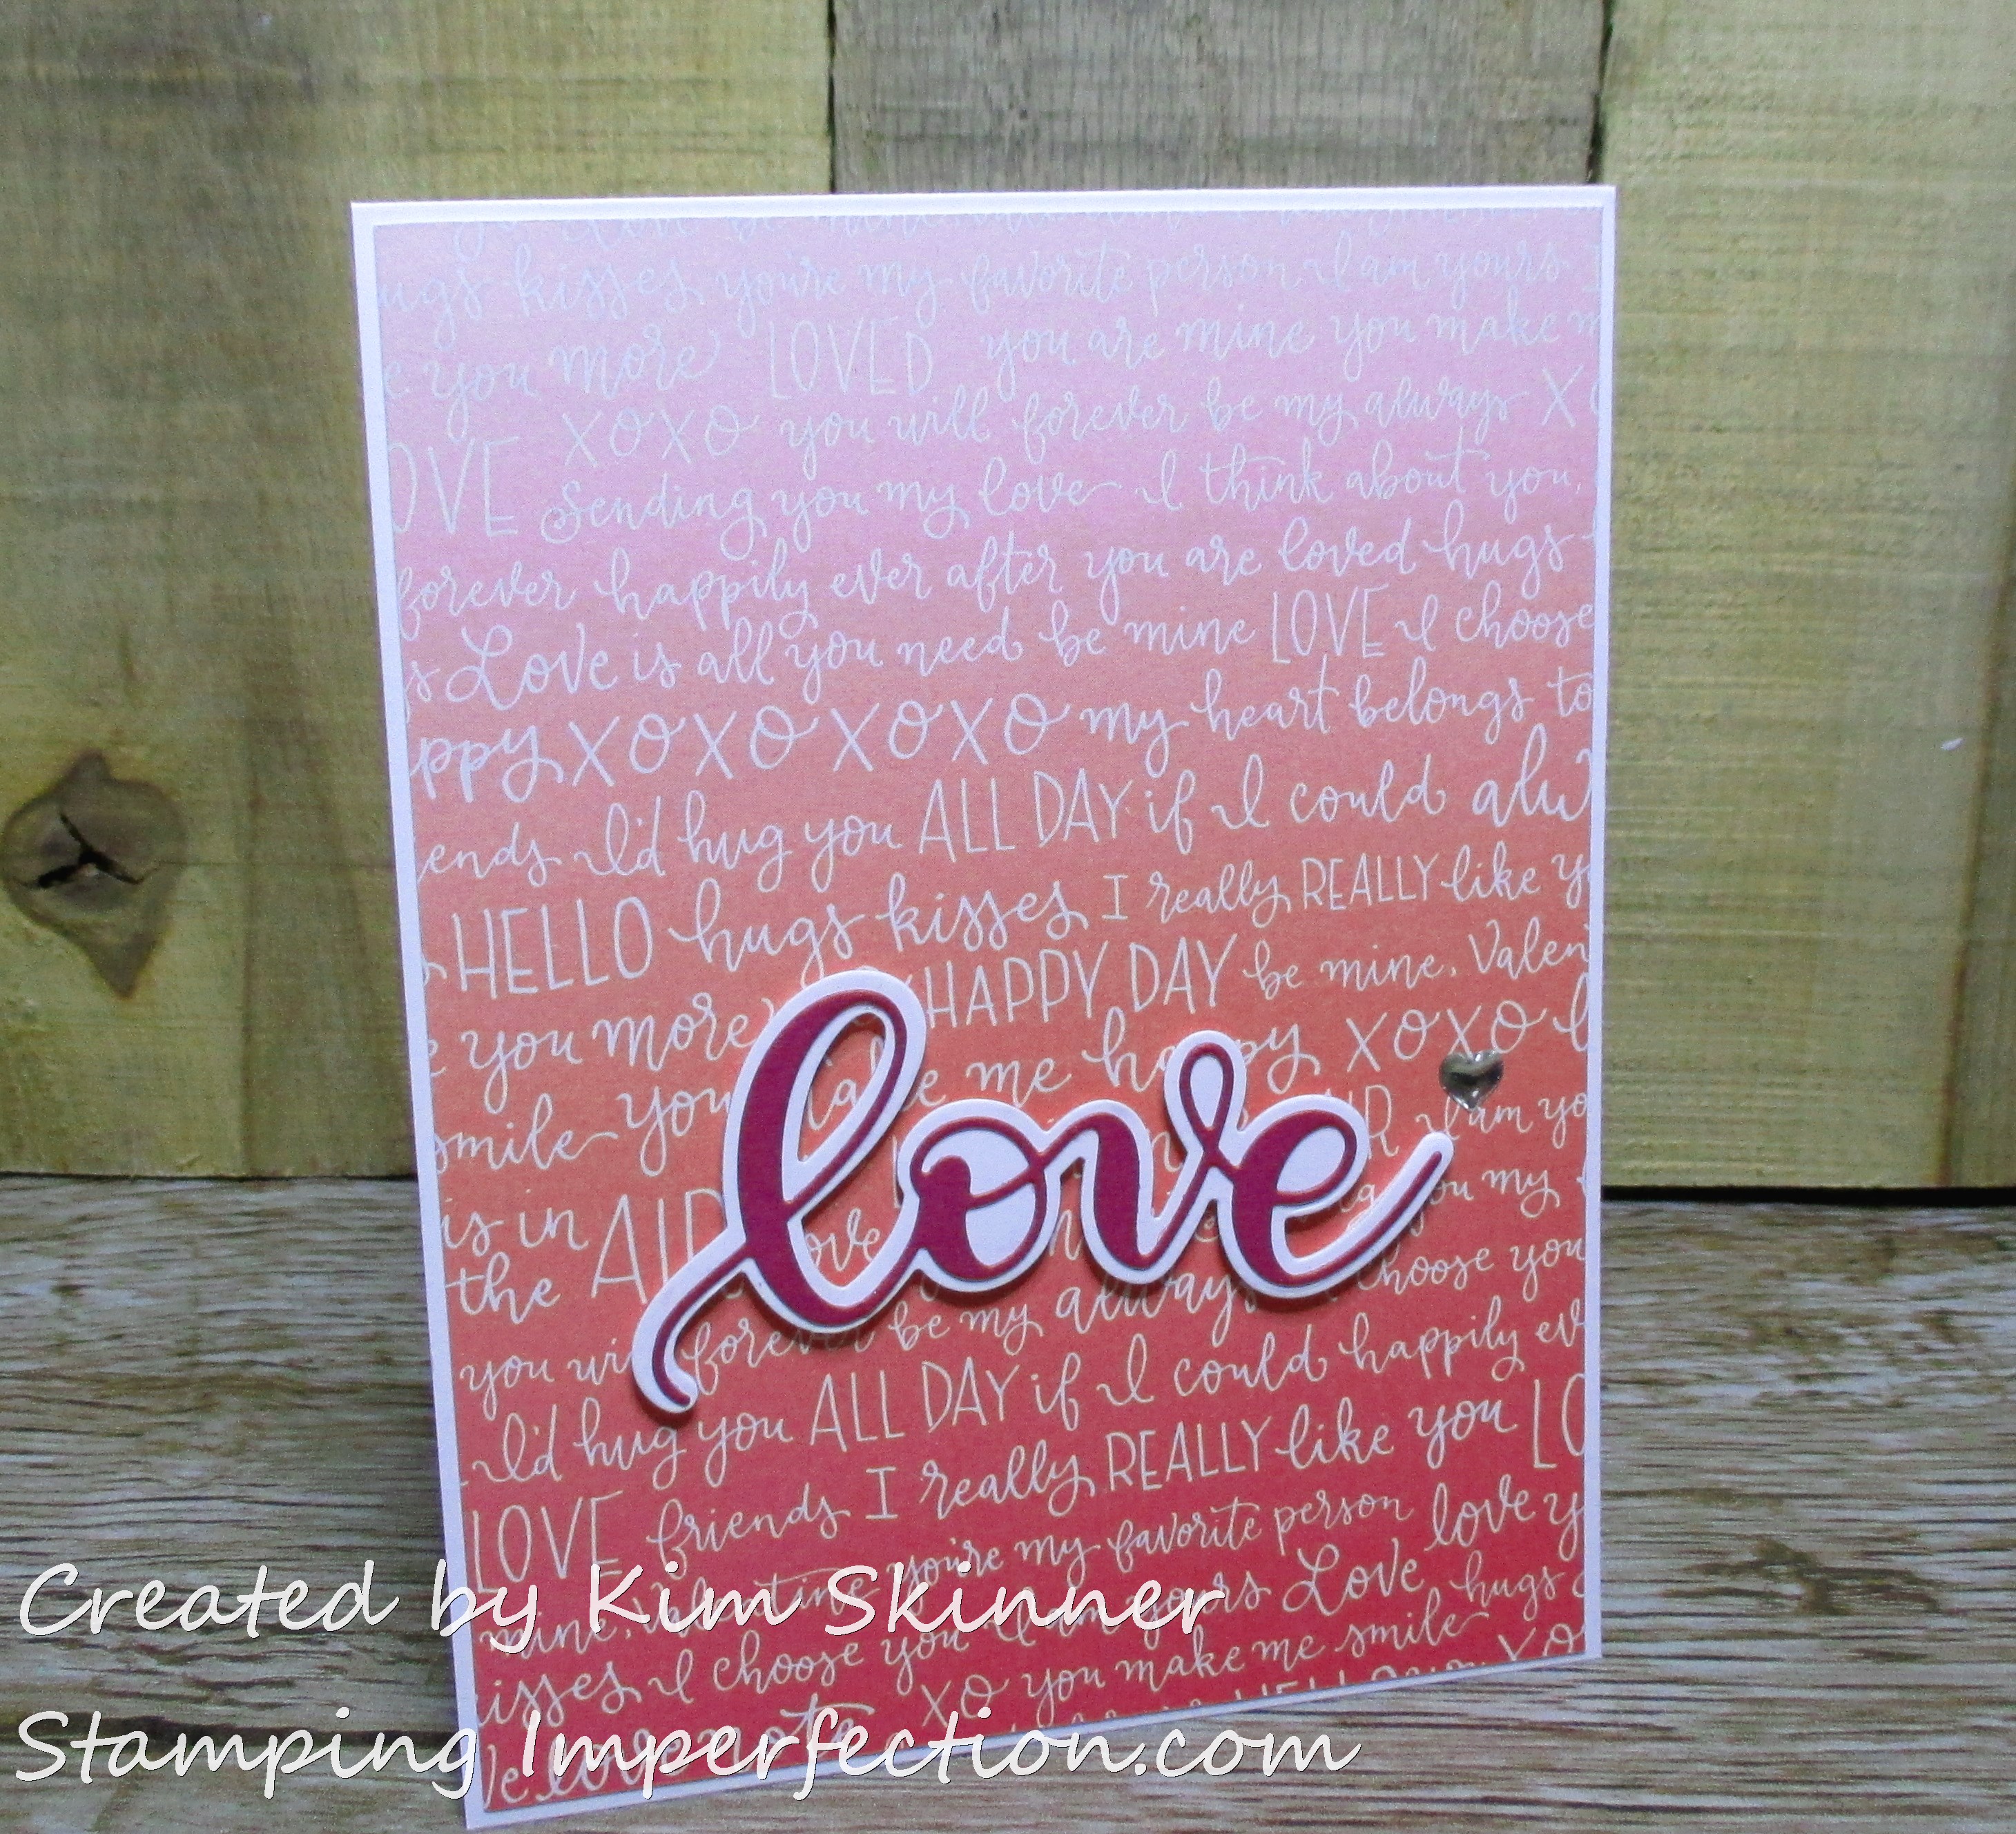 Stamping Imperfection Simon Says Stamps Really Love You